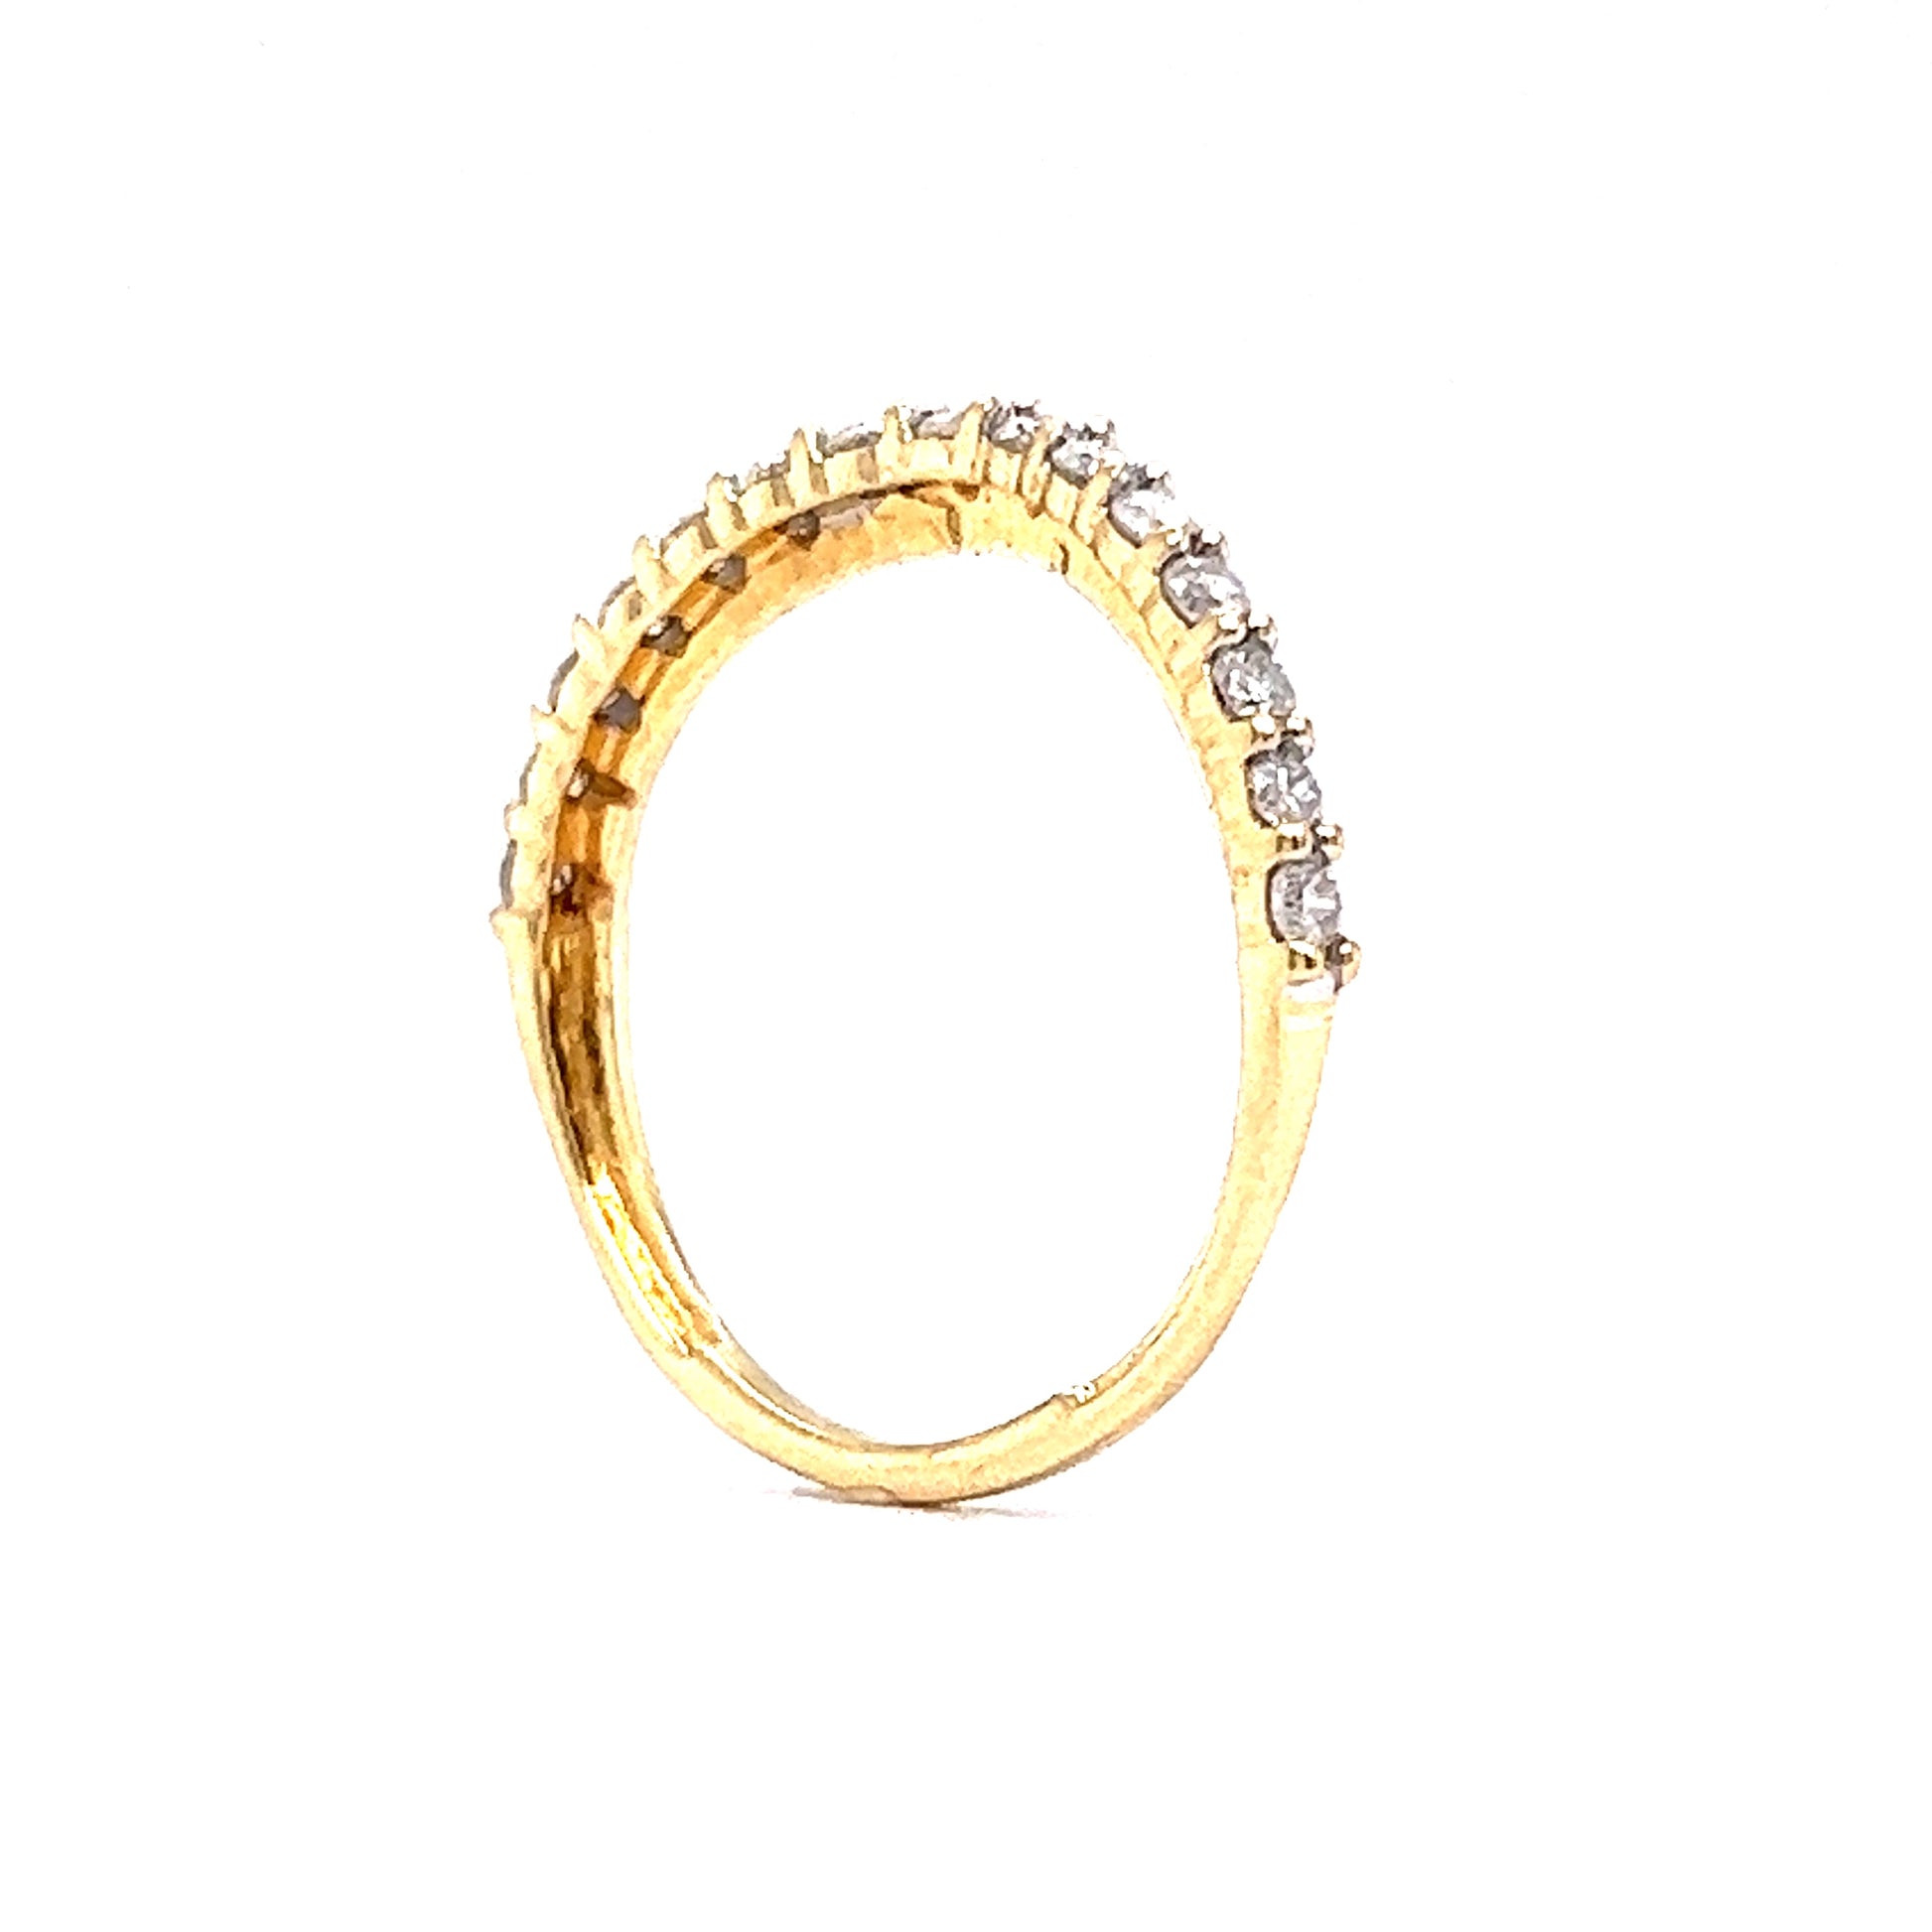 Round Curved Diamond Wedding Band in 14k Yellow GoldComposition: 14 Karat Yellow Gold Ring Size: 6 Total Diamond Weight: .375ct Total Gram Weight: 1.4 g